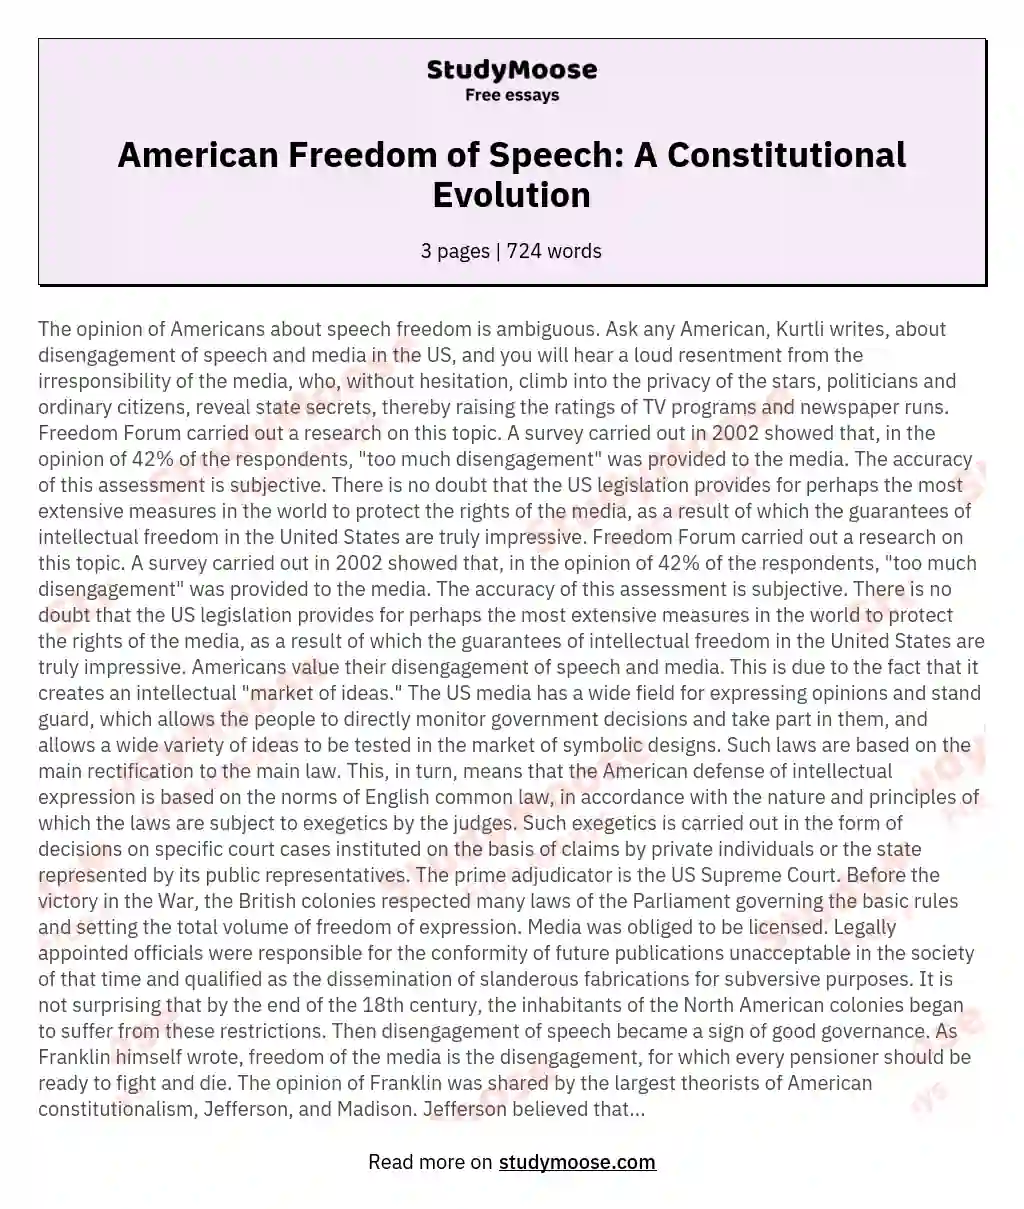 American Freedom of Speech: A Constitutional Evolution essay